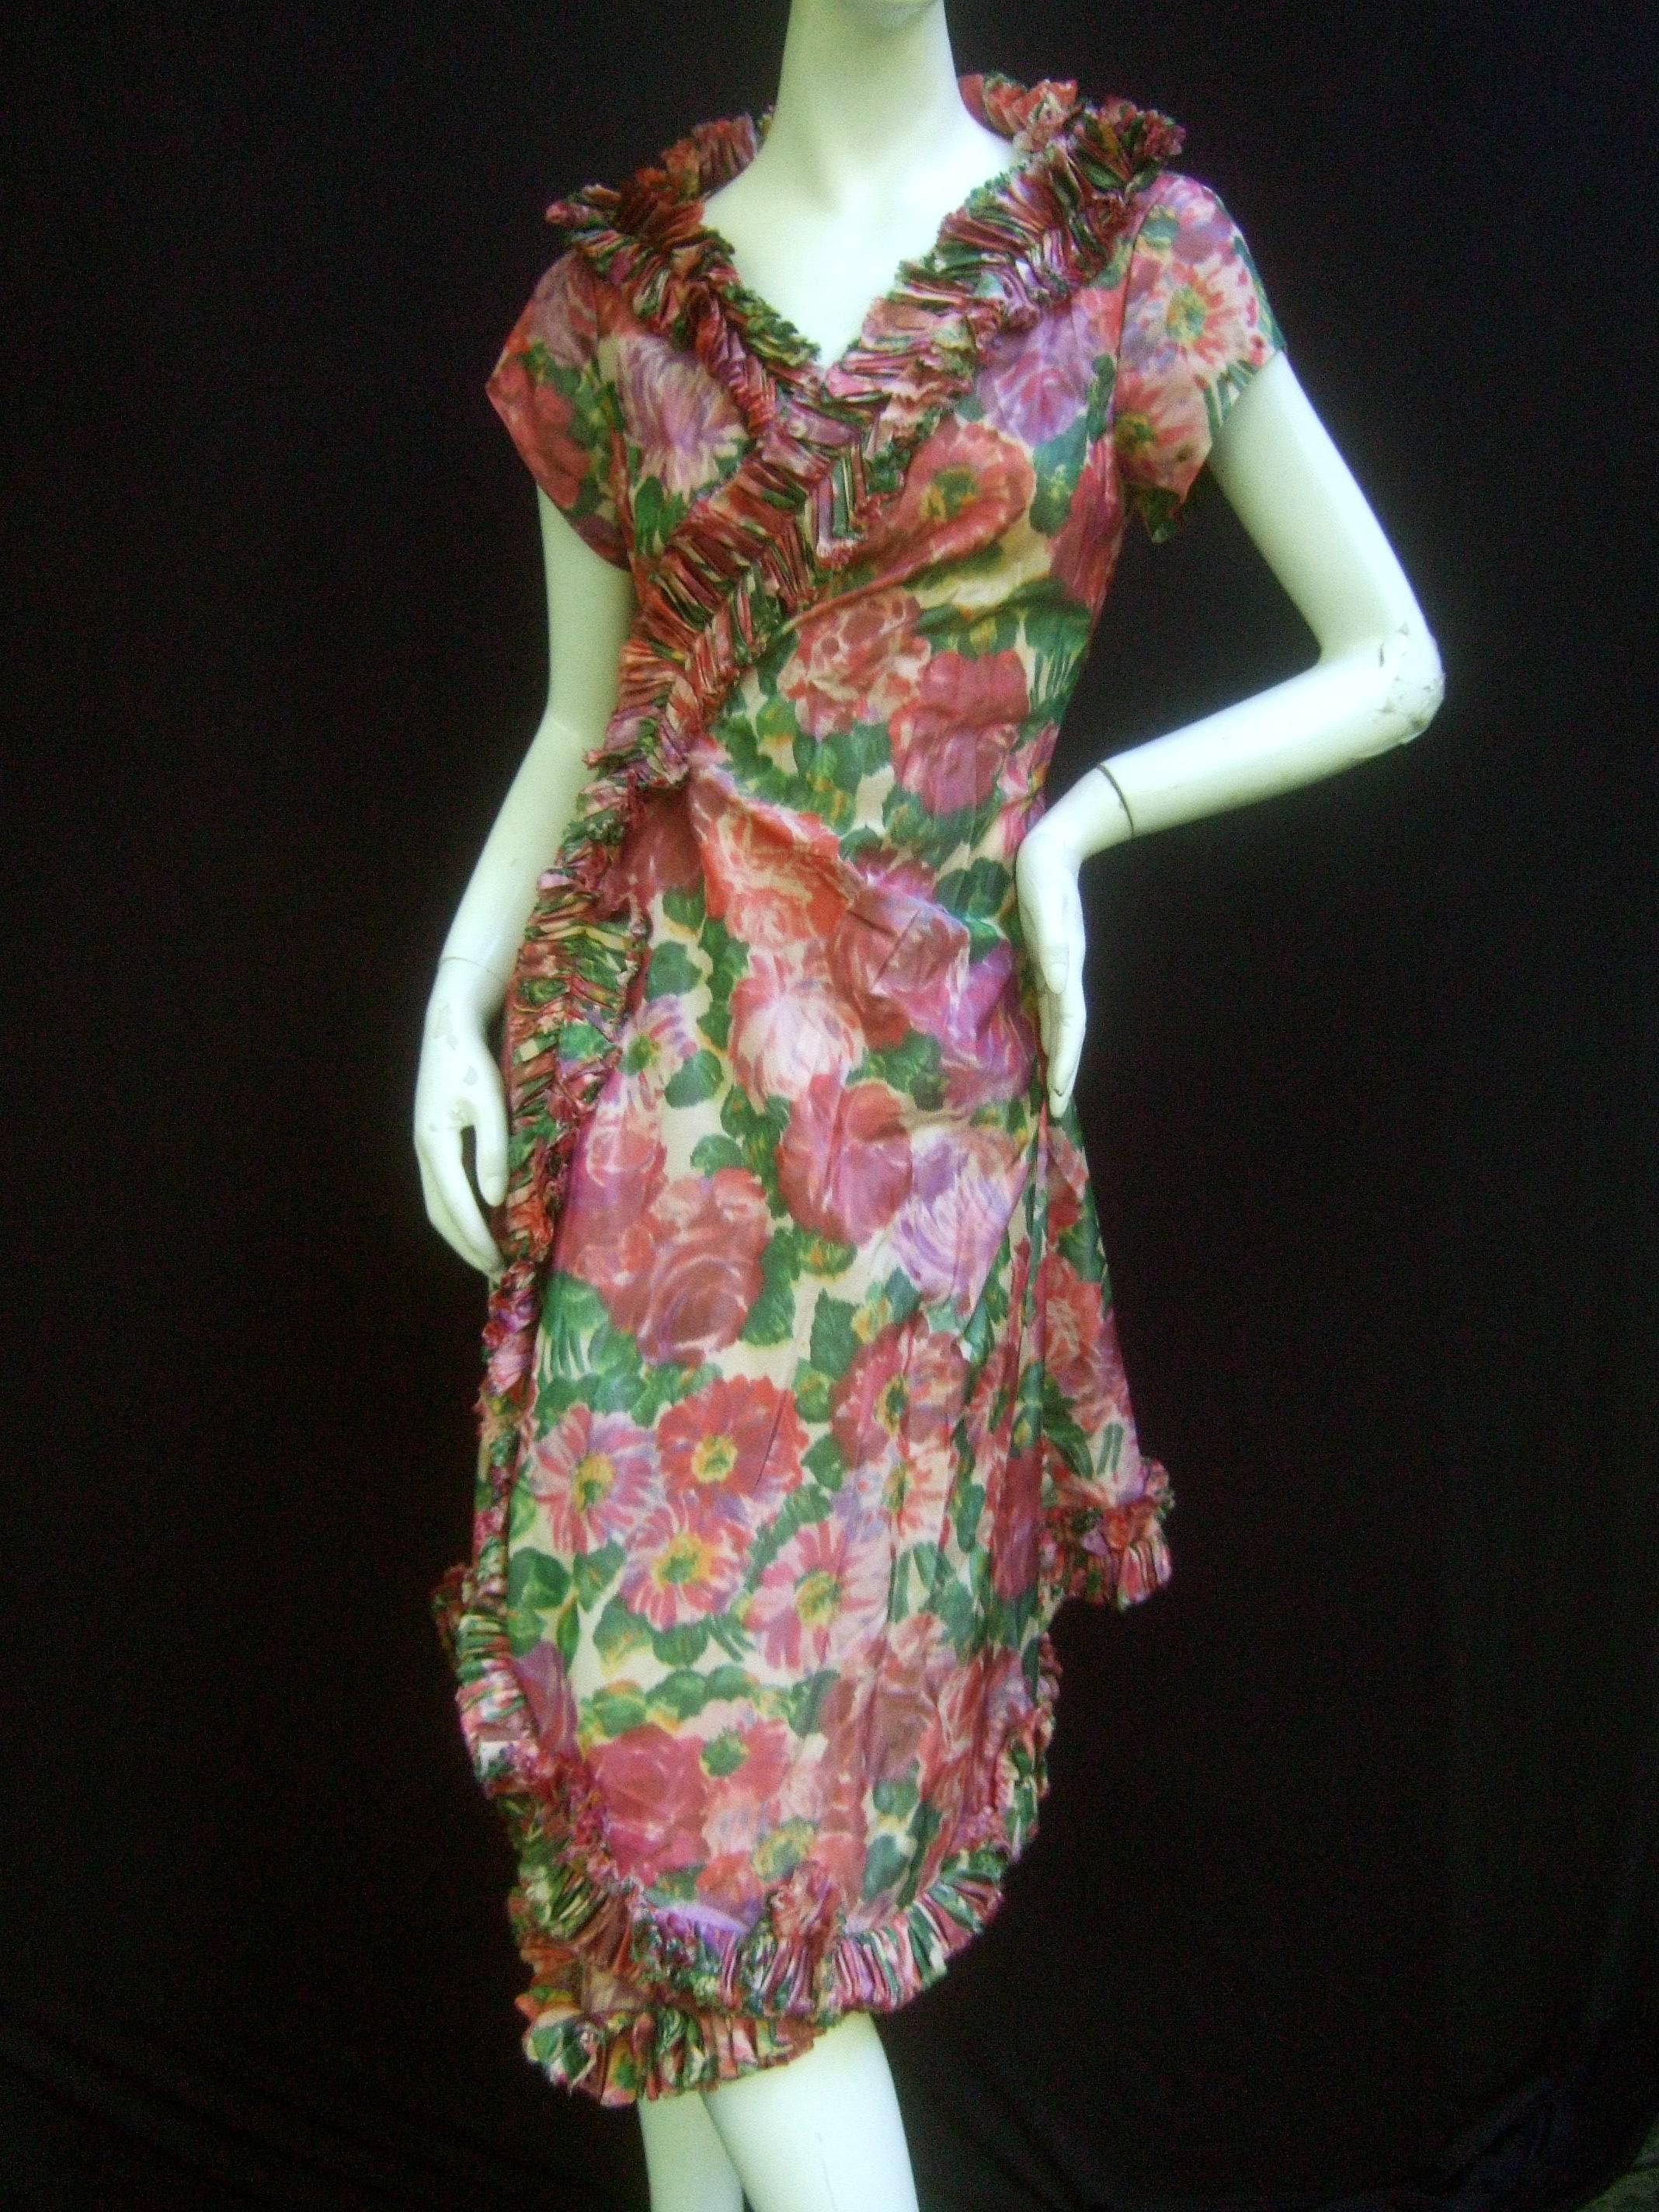 Lucie Ann Beverly Hills taffeta rose print wrap dress c 1960
The stylish romantic retro dress is infused with a lush garden 
of muted pastel rose blooms

The neckline, front opening and hemline are distinguished 
with a ruffled pleated border. The